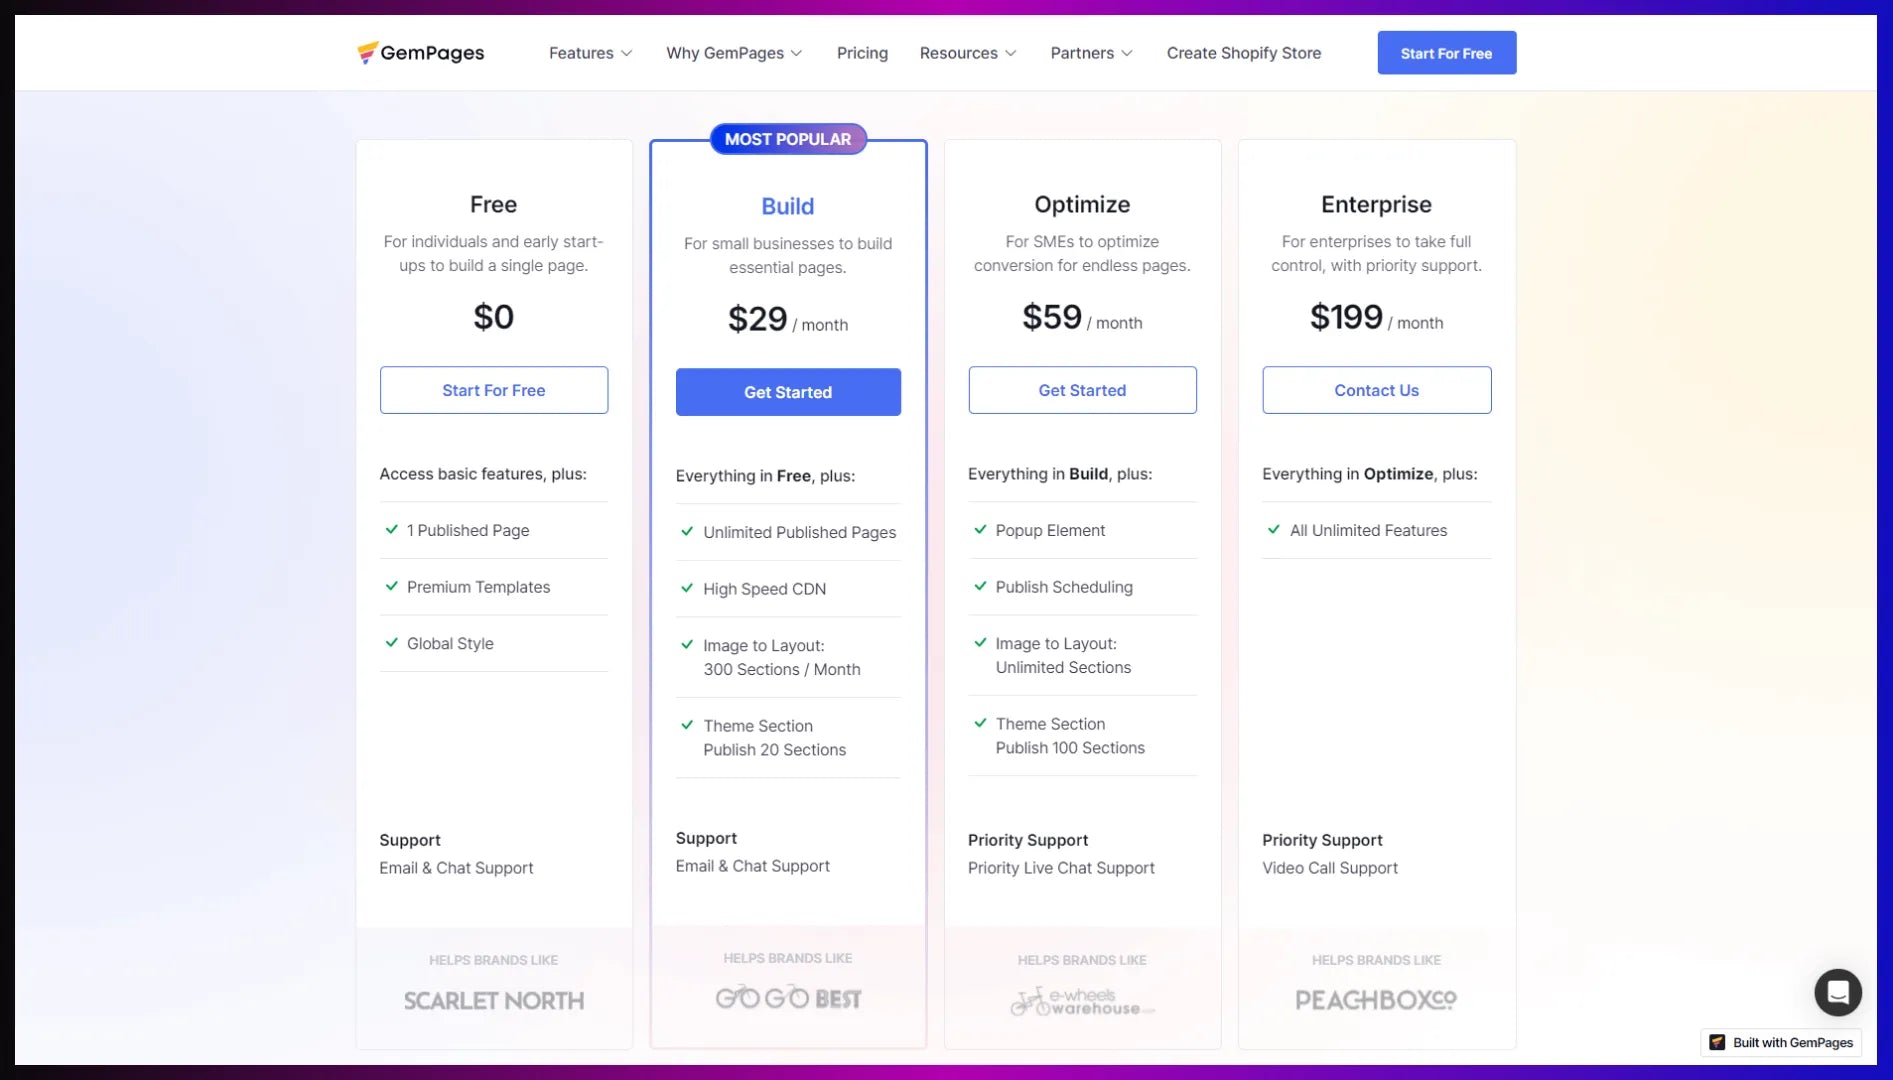 GemPages’ pricing plans